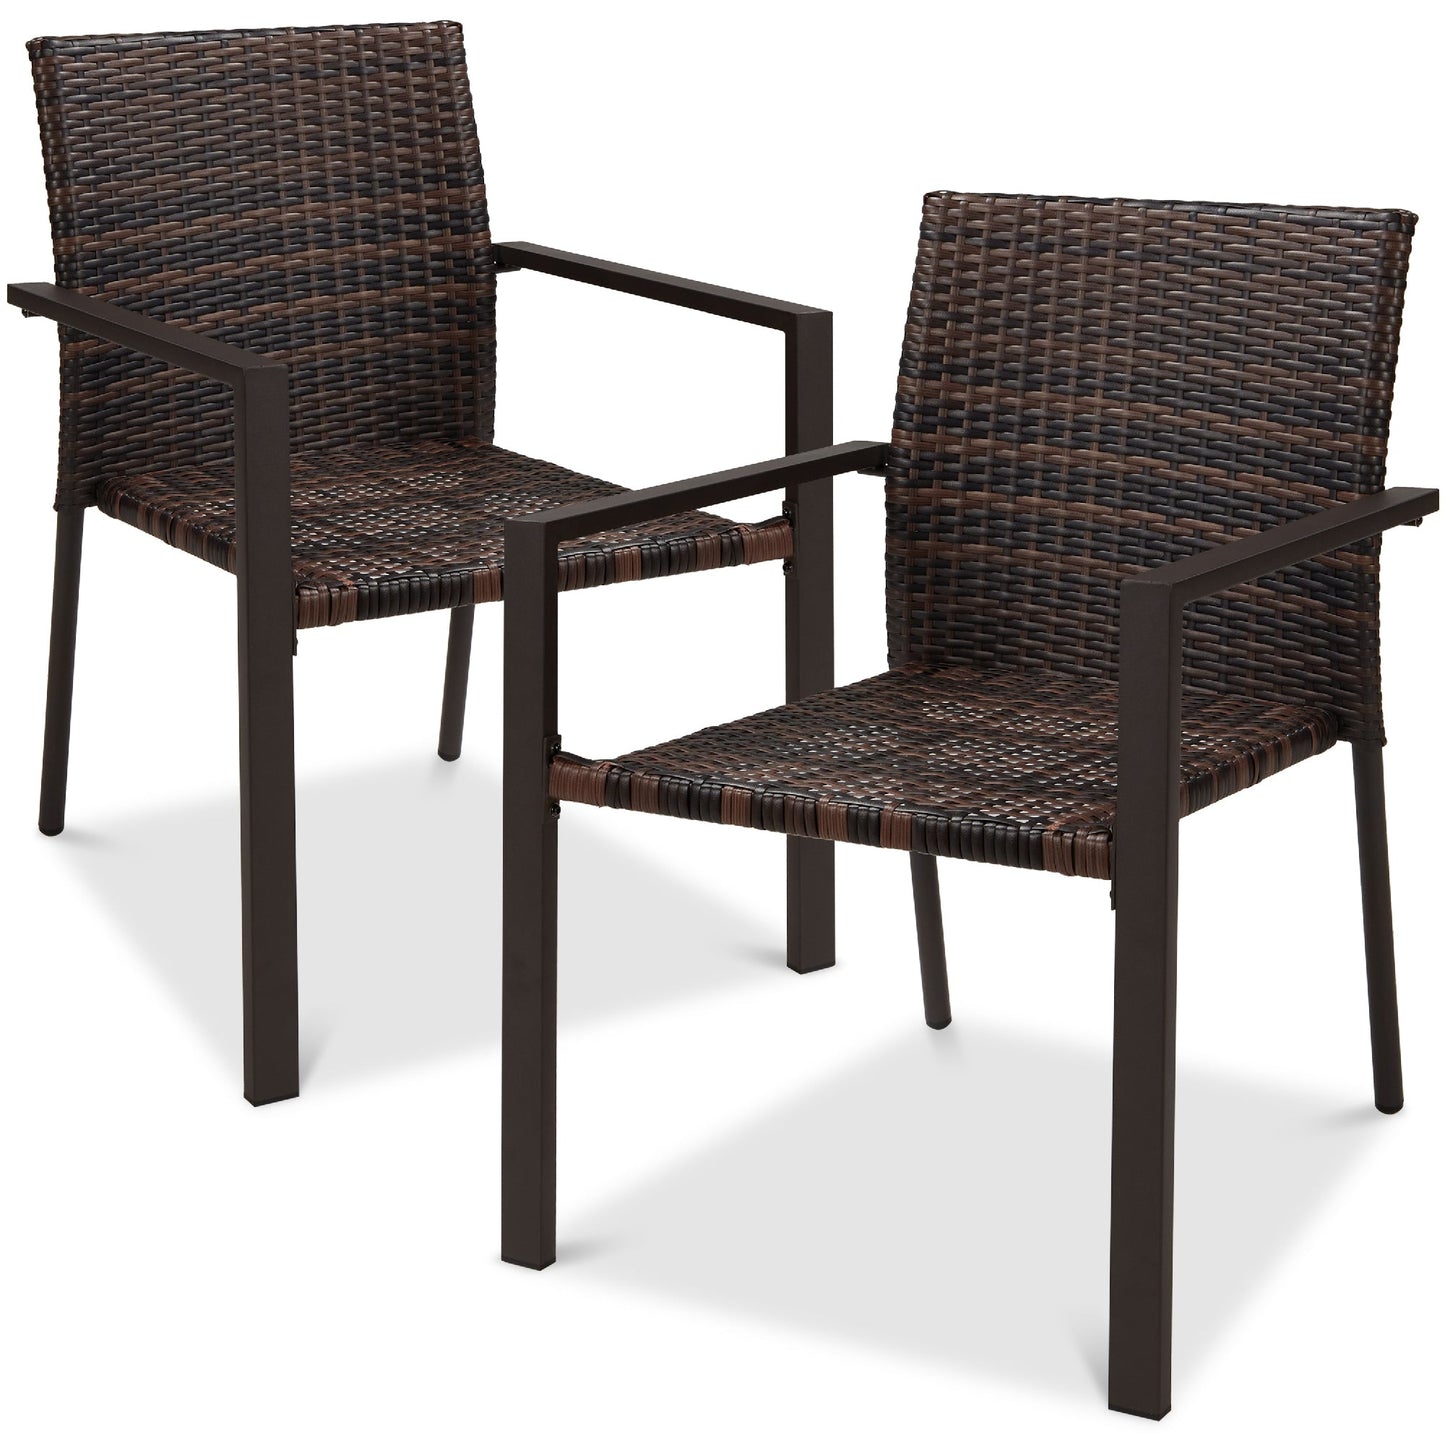 Set of 2 Stackable Wicker Chairs w/ Armrests, Steel Accent Furniture